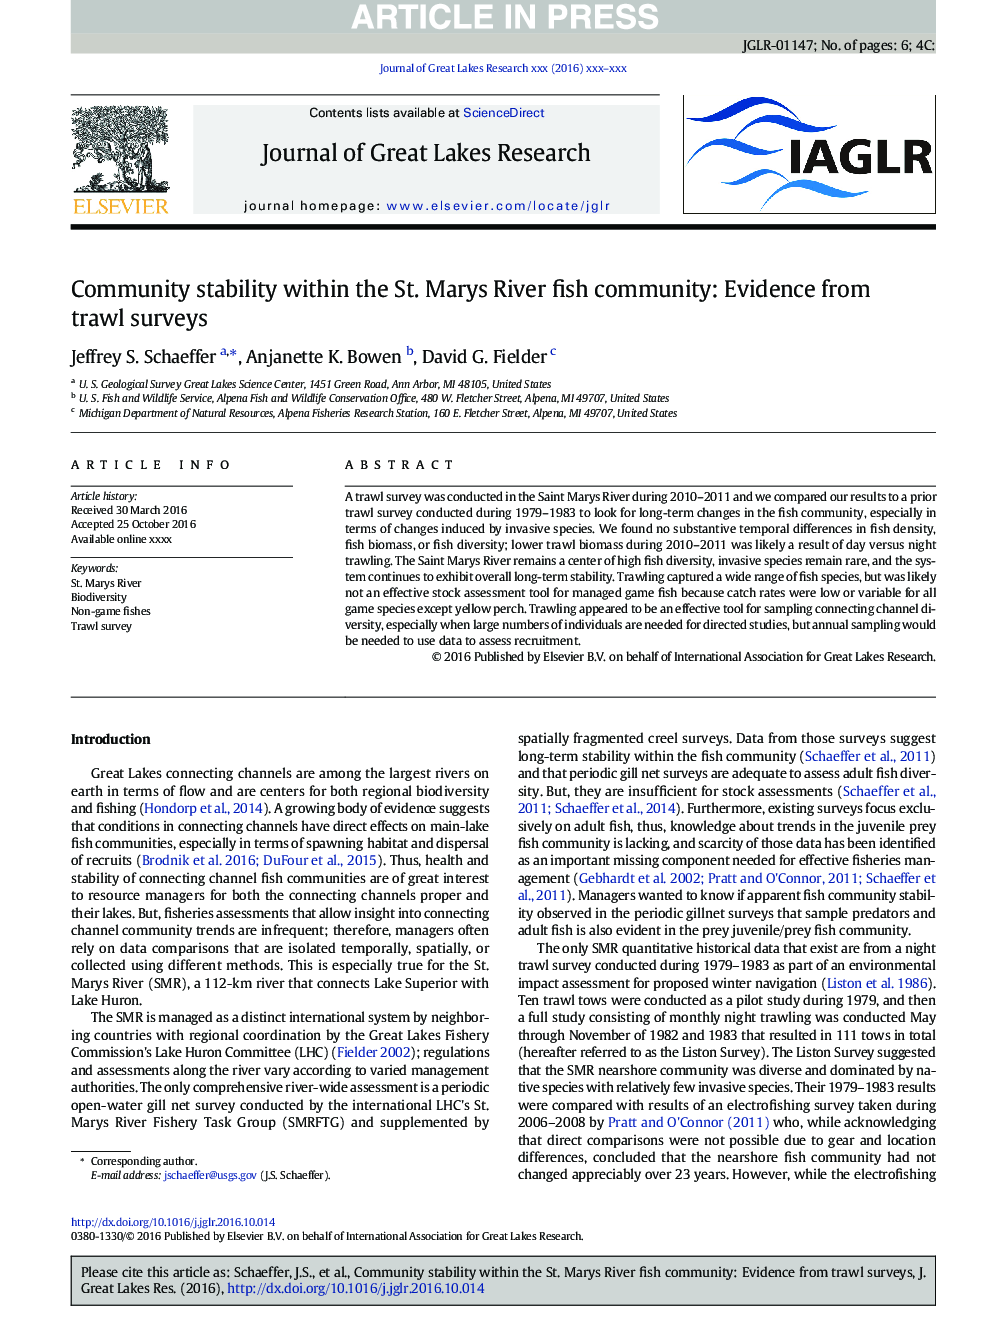 Community stability within the St. Marys River fish community: Evidence from trawl surveys